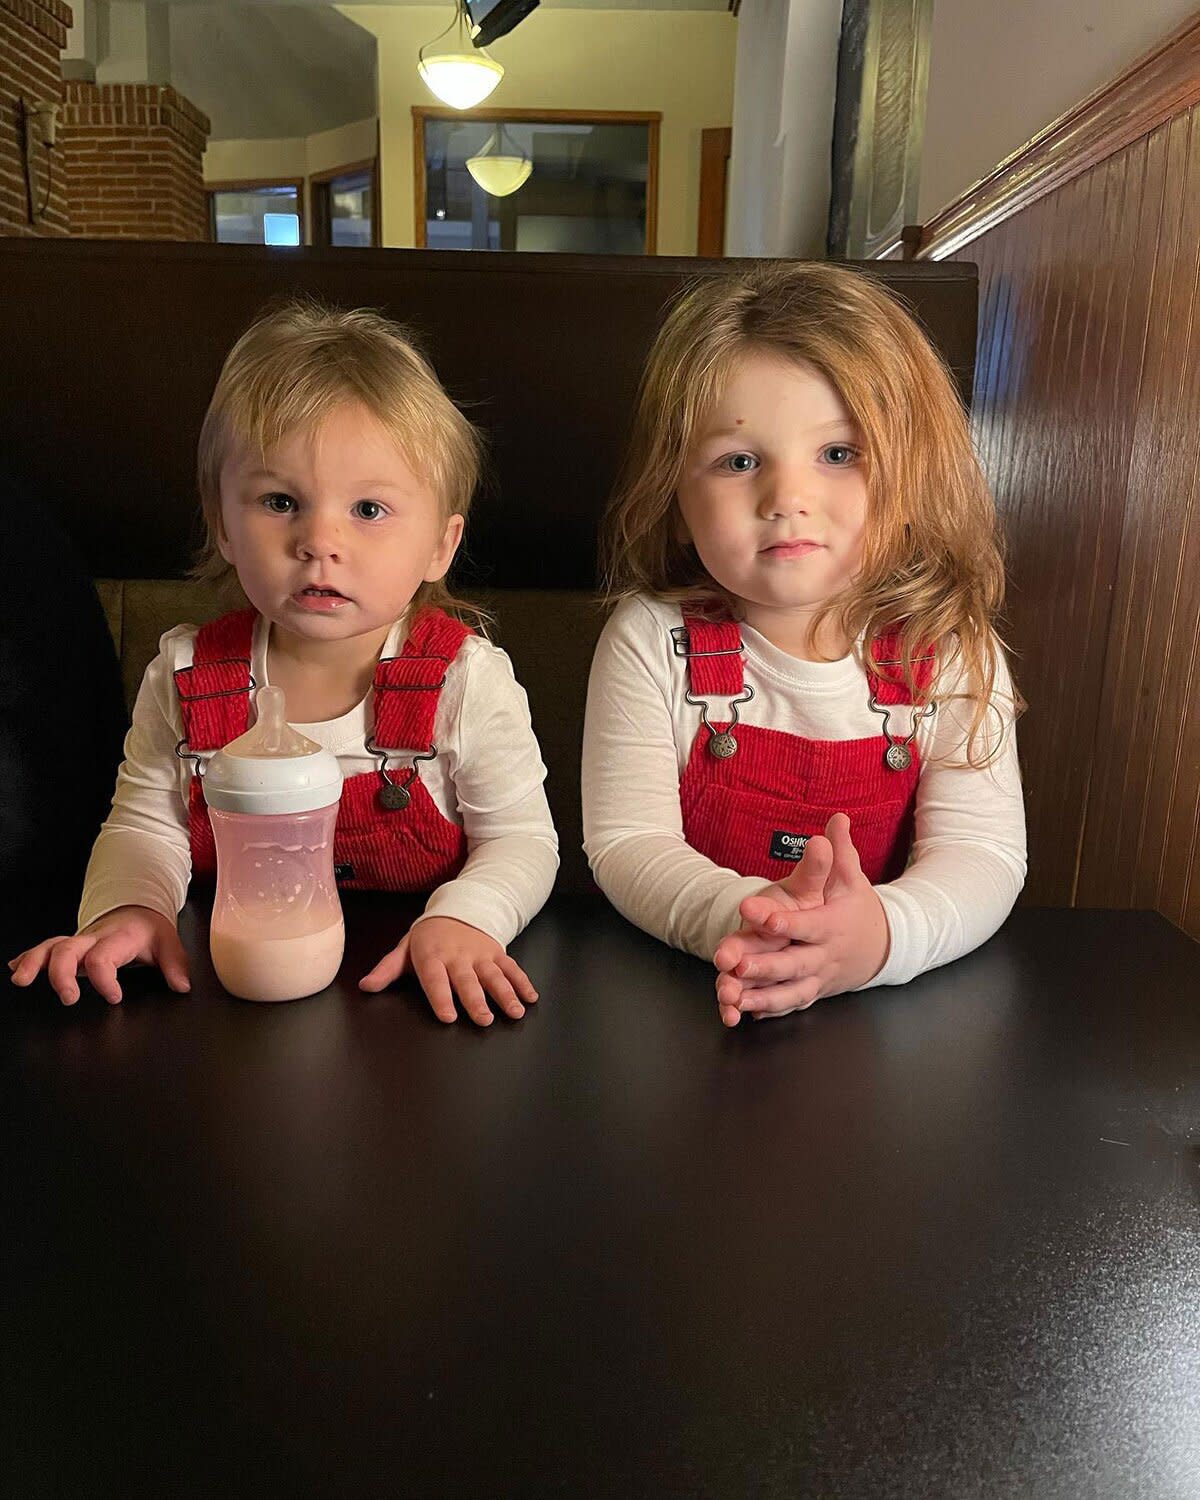 Rosie O'Donnell Shares Sweet Photo of Daughter Chelsea's Older Kids, Riley and Skylar  https://www.instagram.com/p/CmCr2gzSnXs/